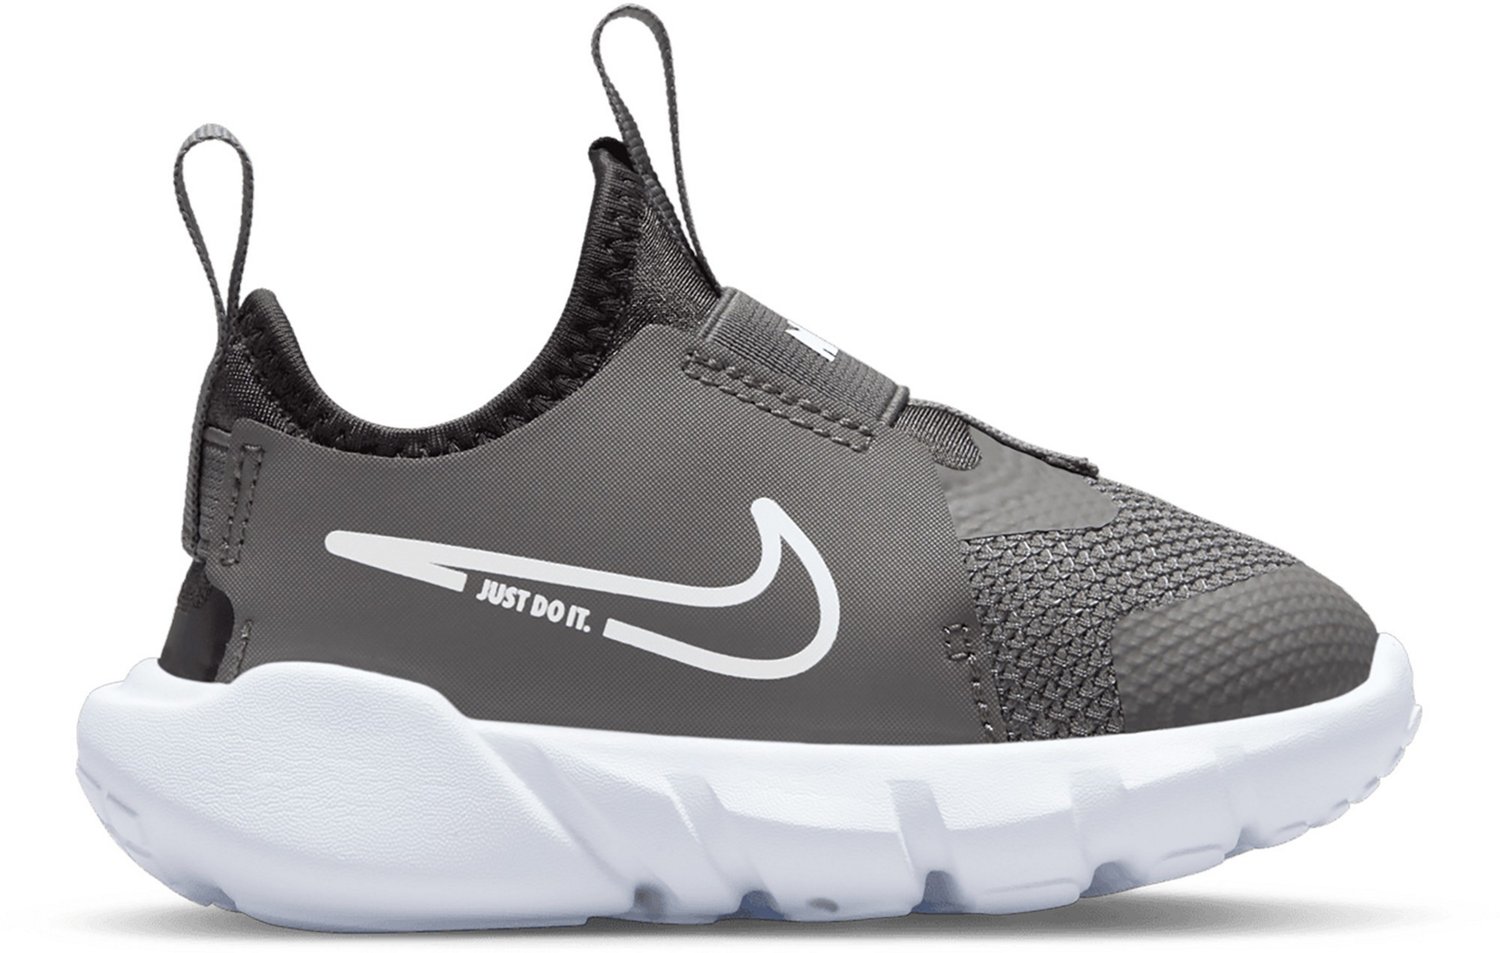 Nike Toddlers' Flex Runner 2 Shoes | Free Shipping at Academy